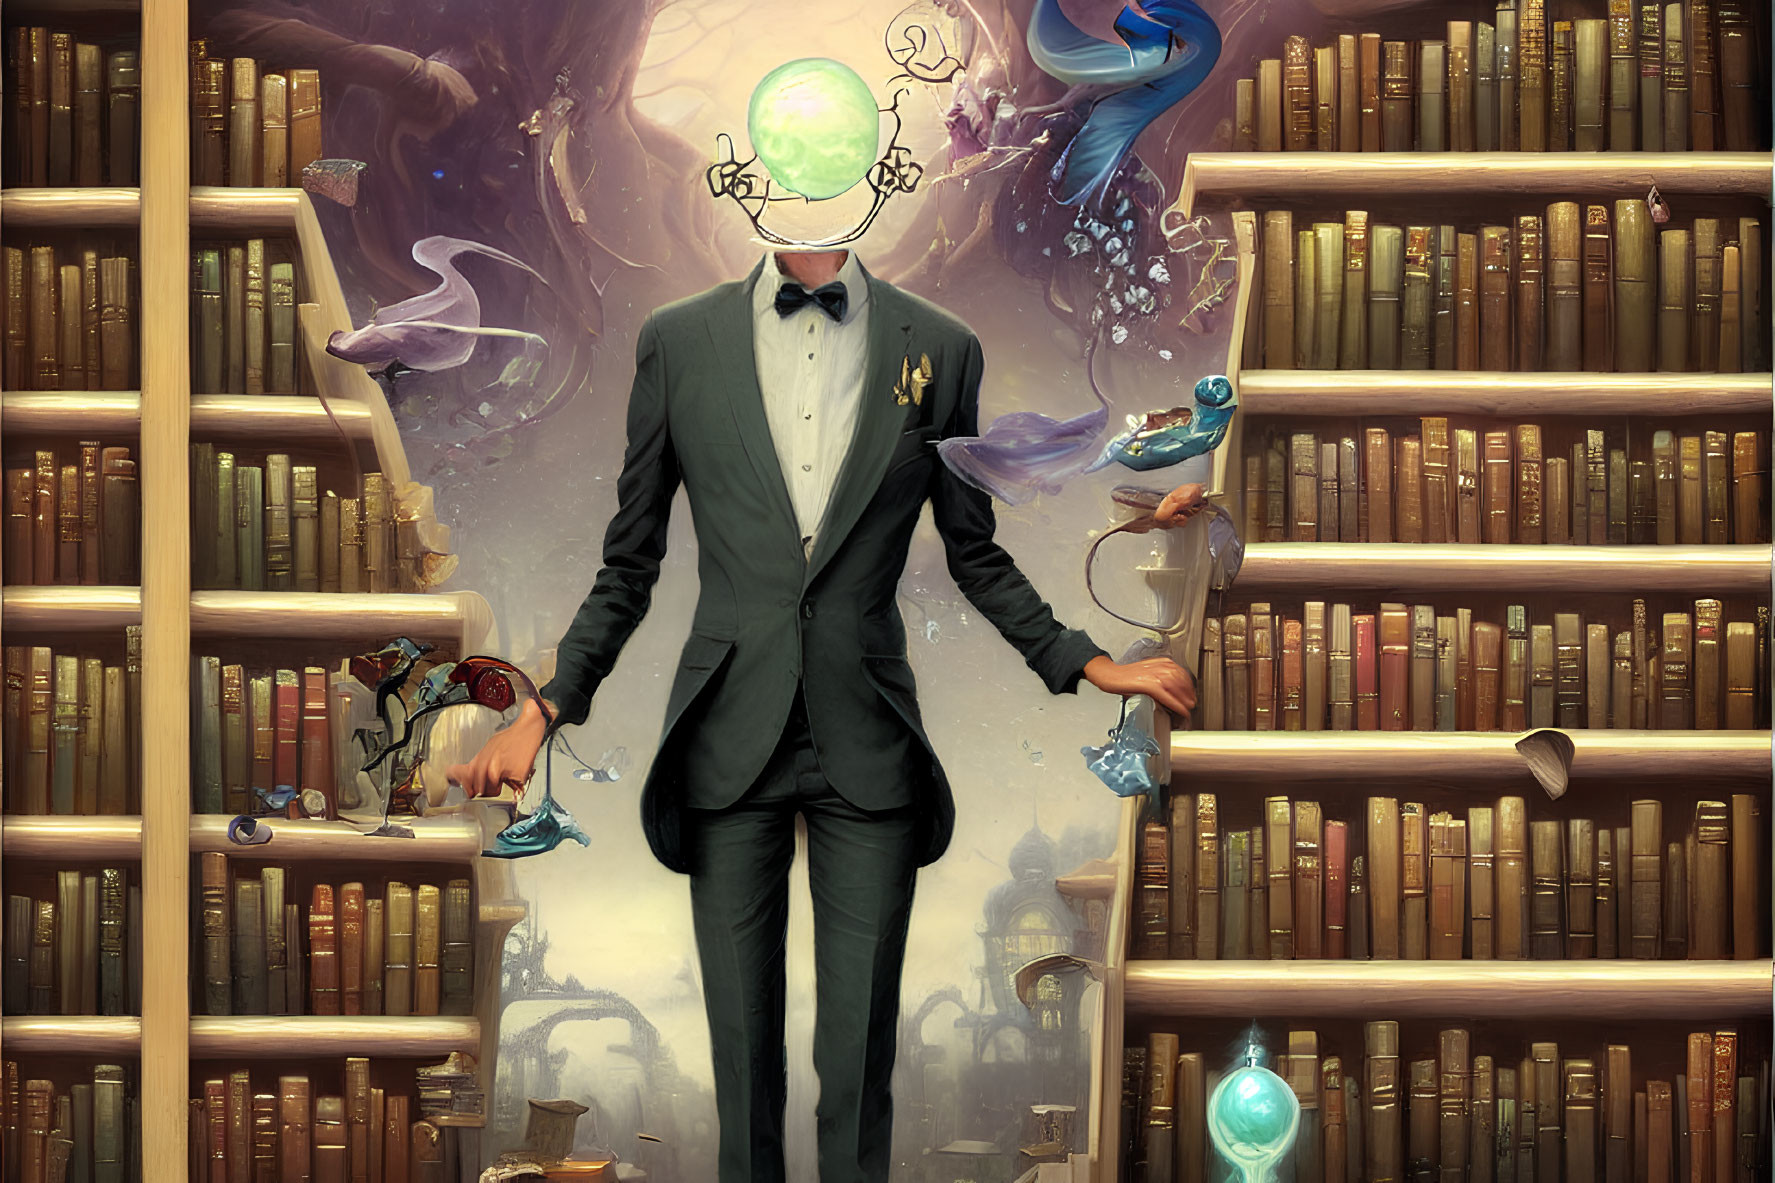 Headless man in suit with mystical items on staircase surrounded by bookshelves